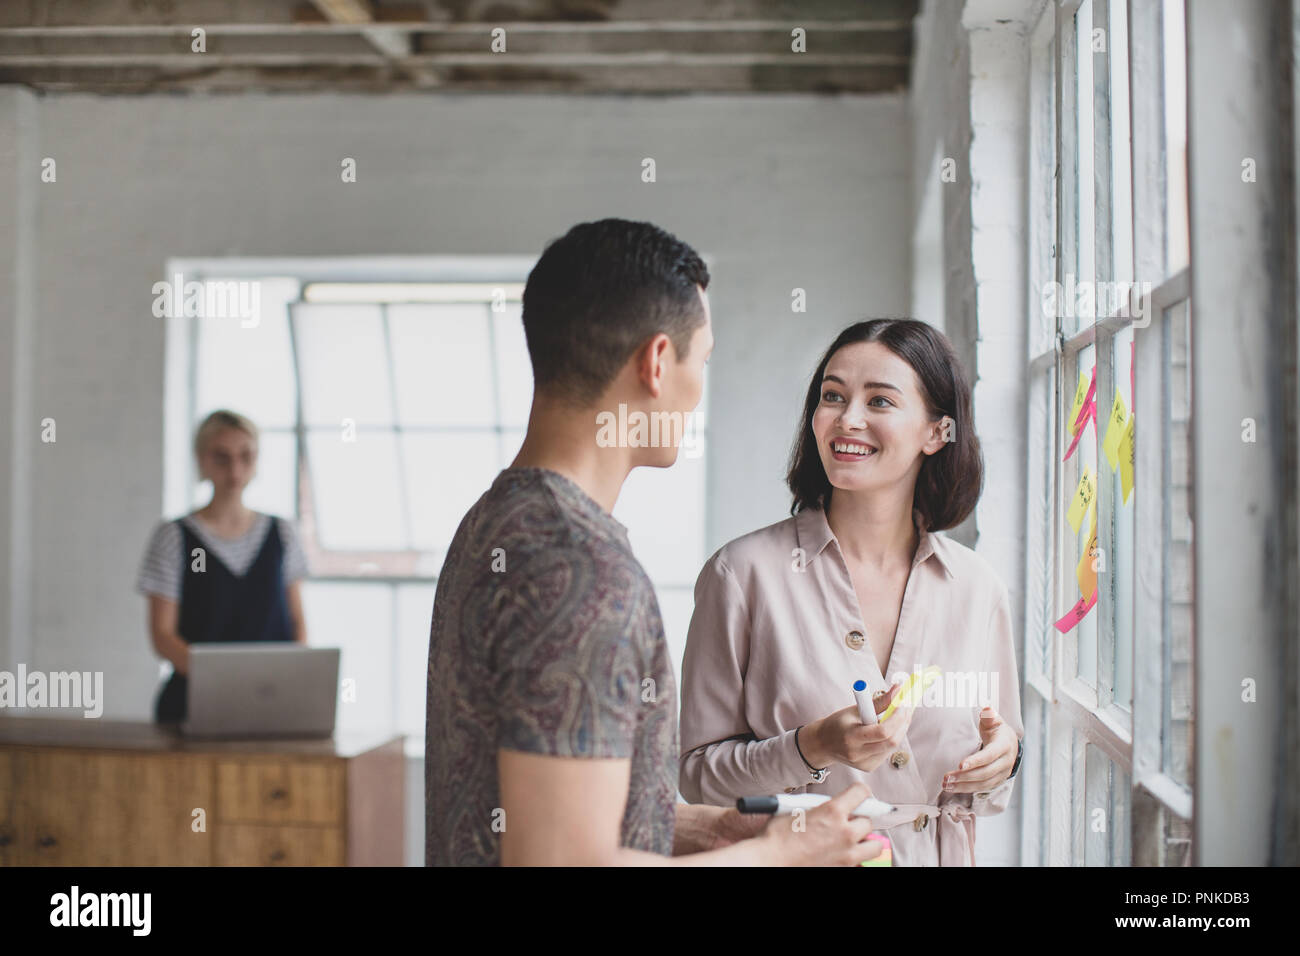 Young adults brainstorming in a creative office with adhesive notes Stock Photo